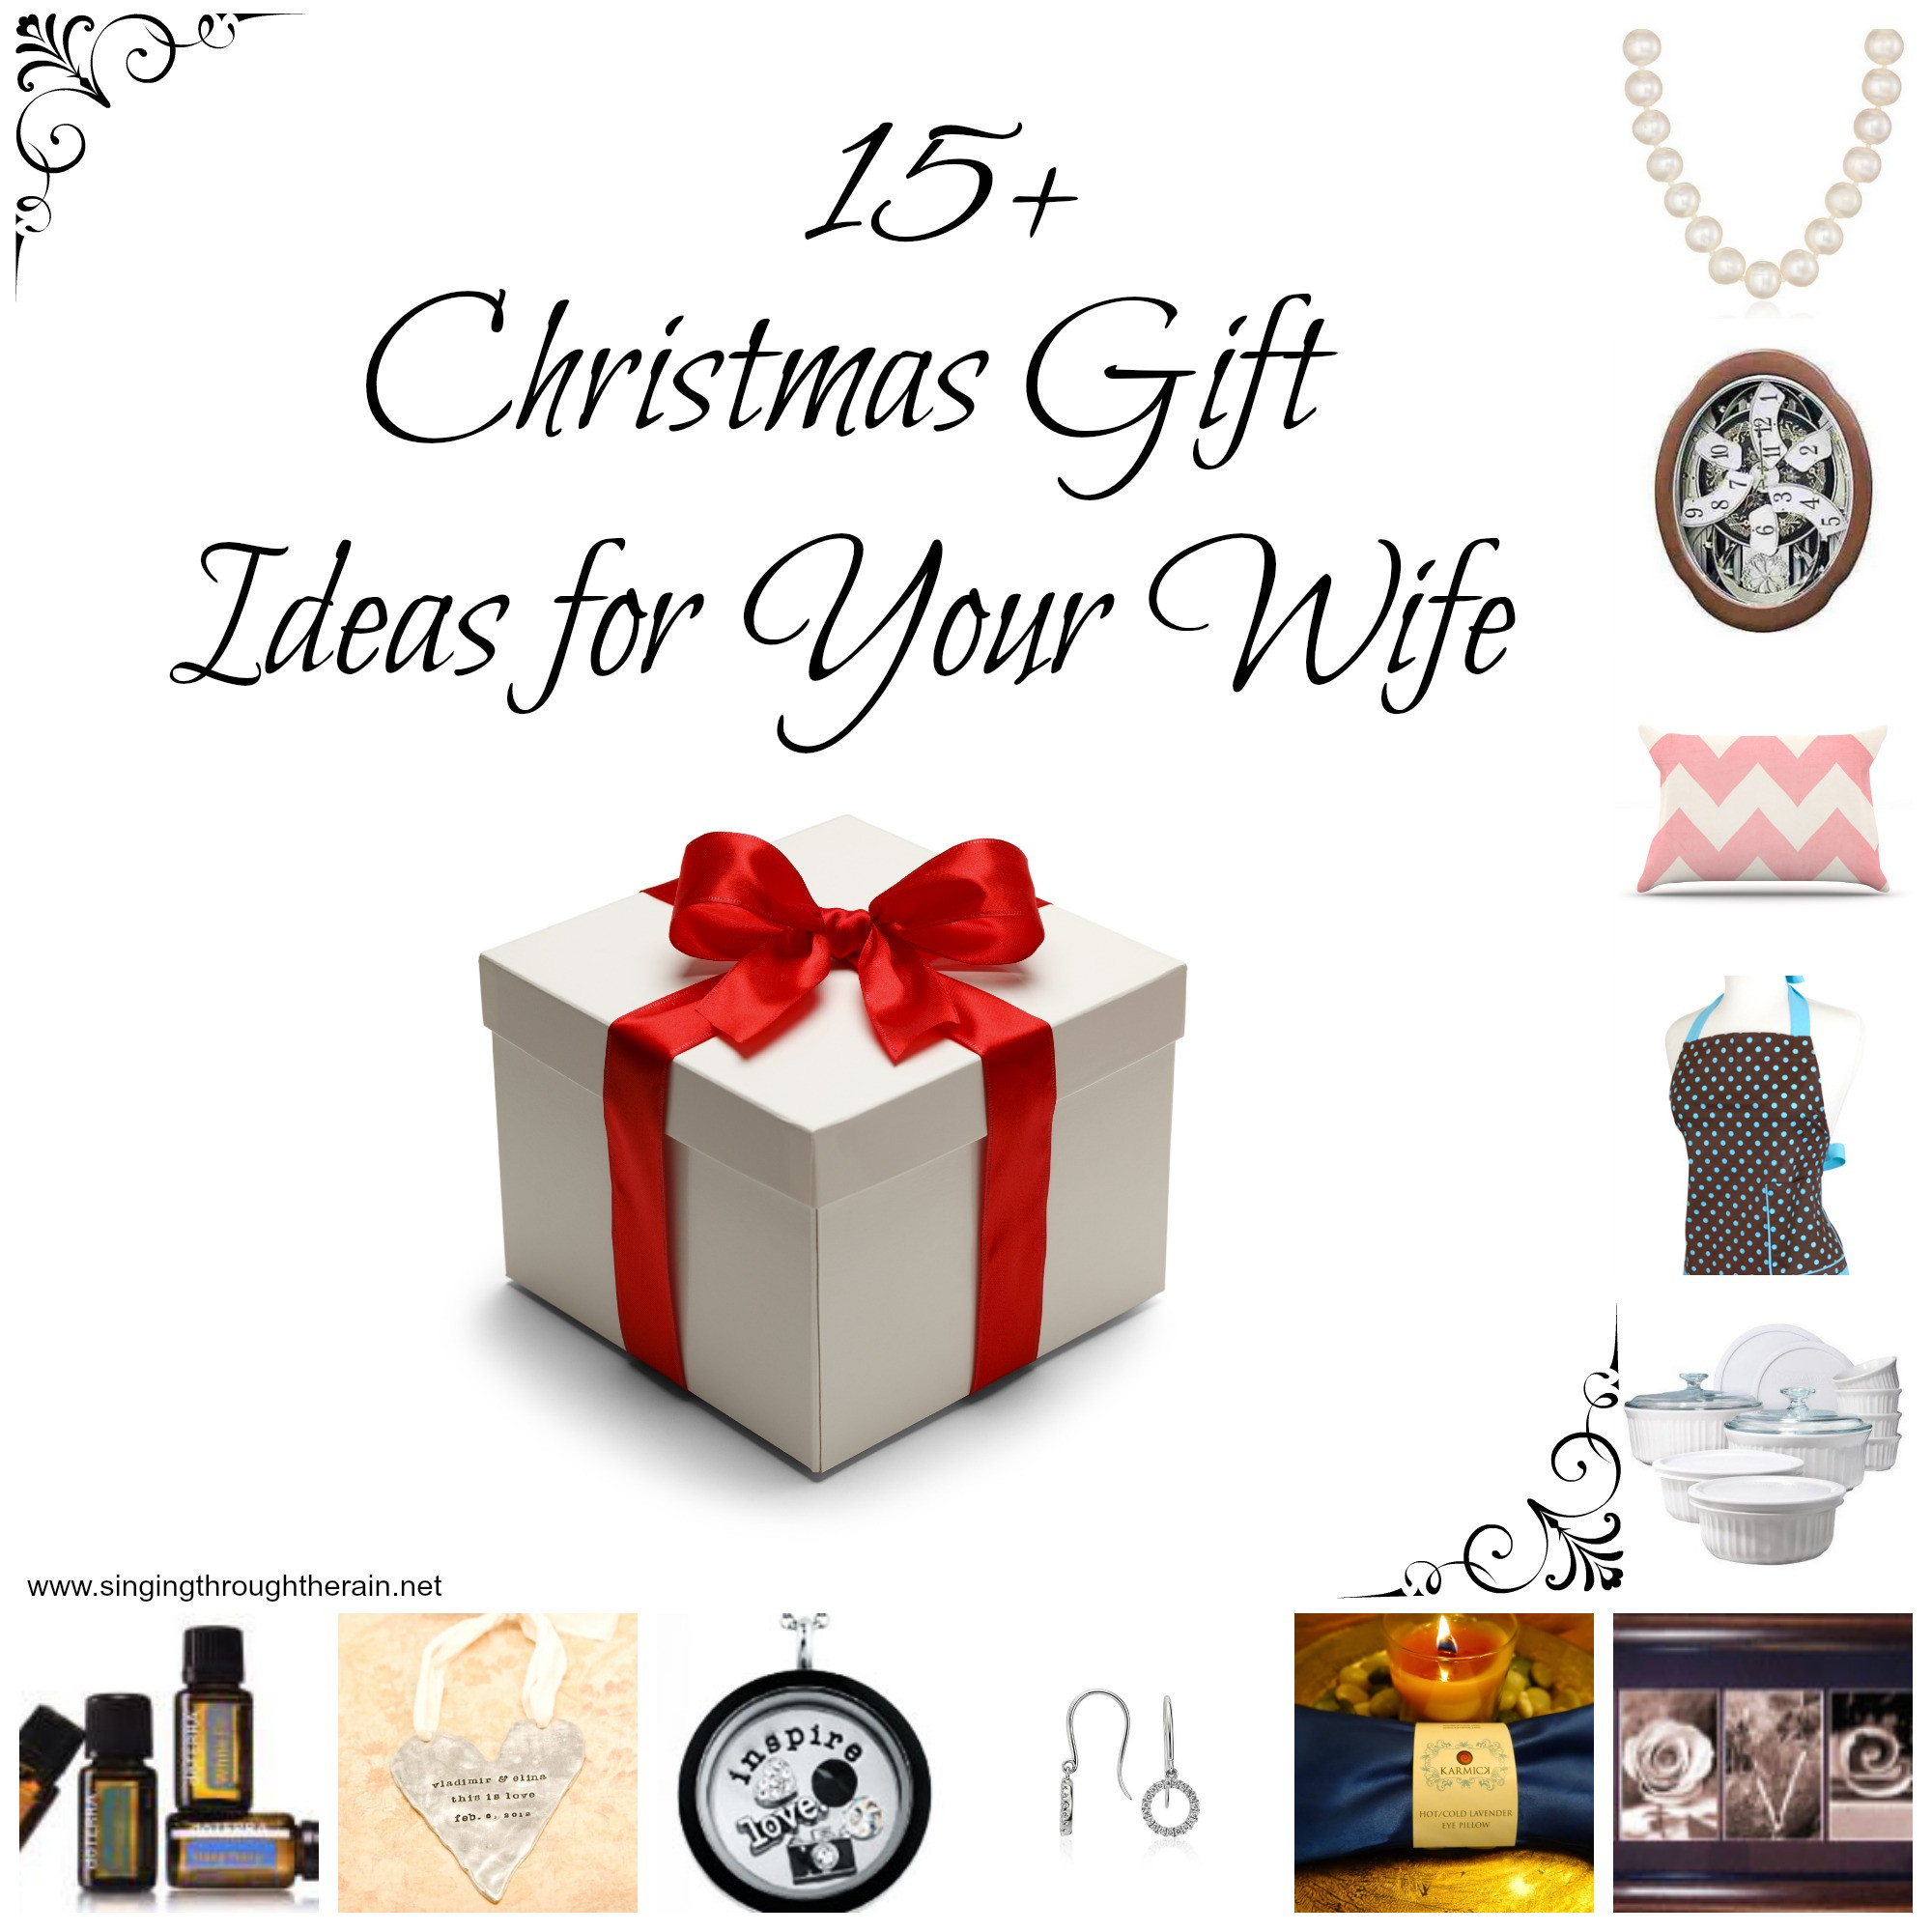 Christmas Gift Ideas For My Wife
 15 Christmas Gift Ideas for Your Wife